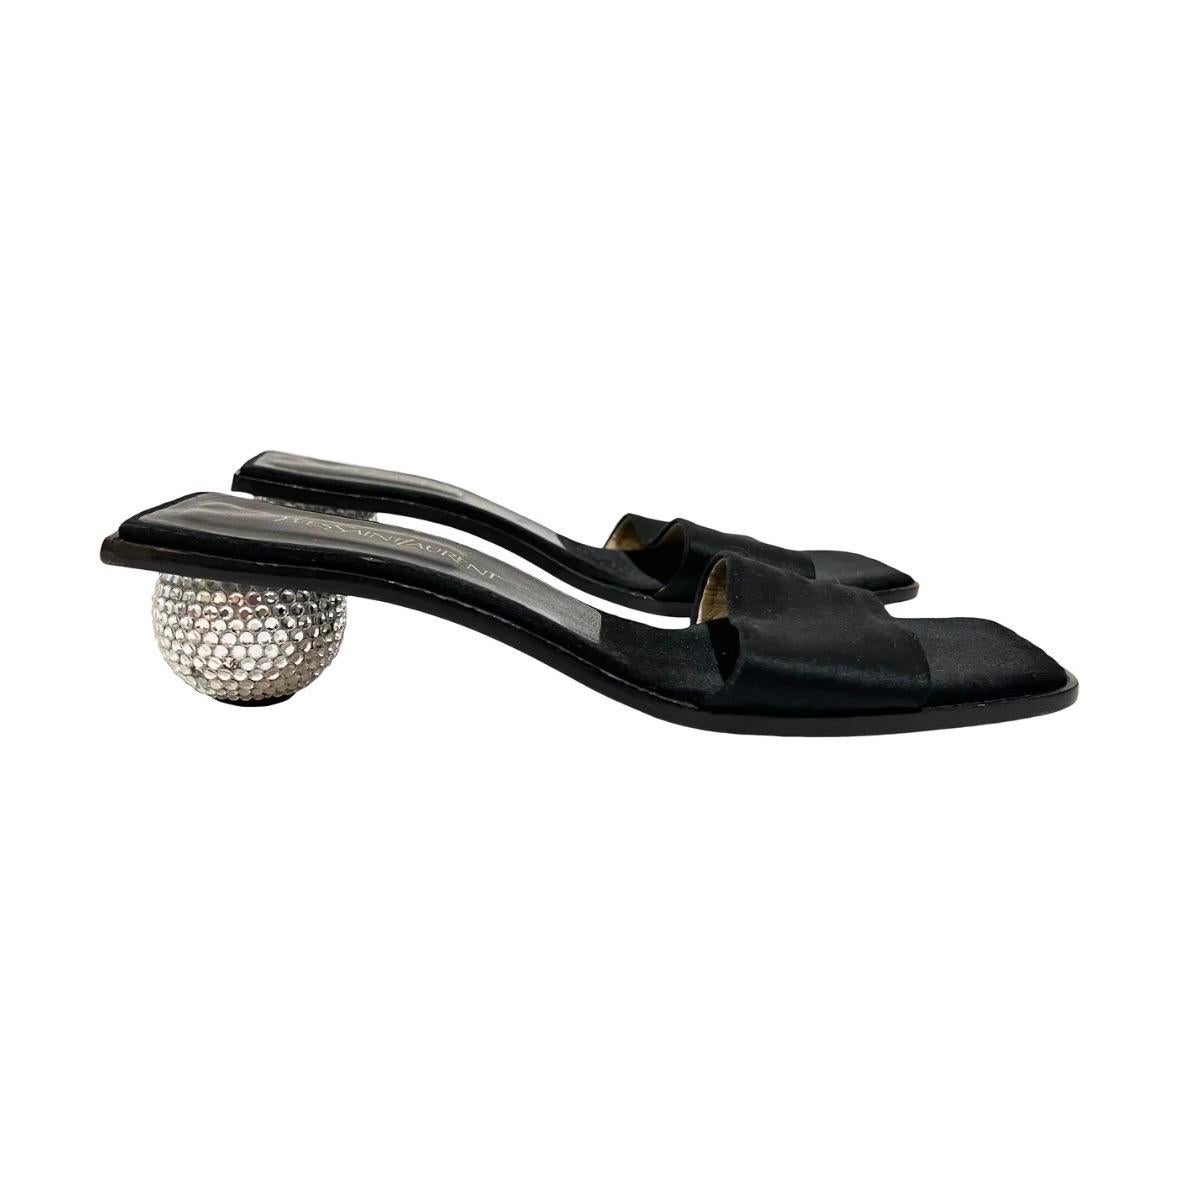 Ball heel sandals by Yves Saint Laurent
Circa 1990's
Made in Italy 
Black satin toe strap 
Black leather insole 
Ball heel covered in crystals 
Wooden sole   
Great vintage condition: some wear on soles, a few missing crystals on each heel (see